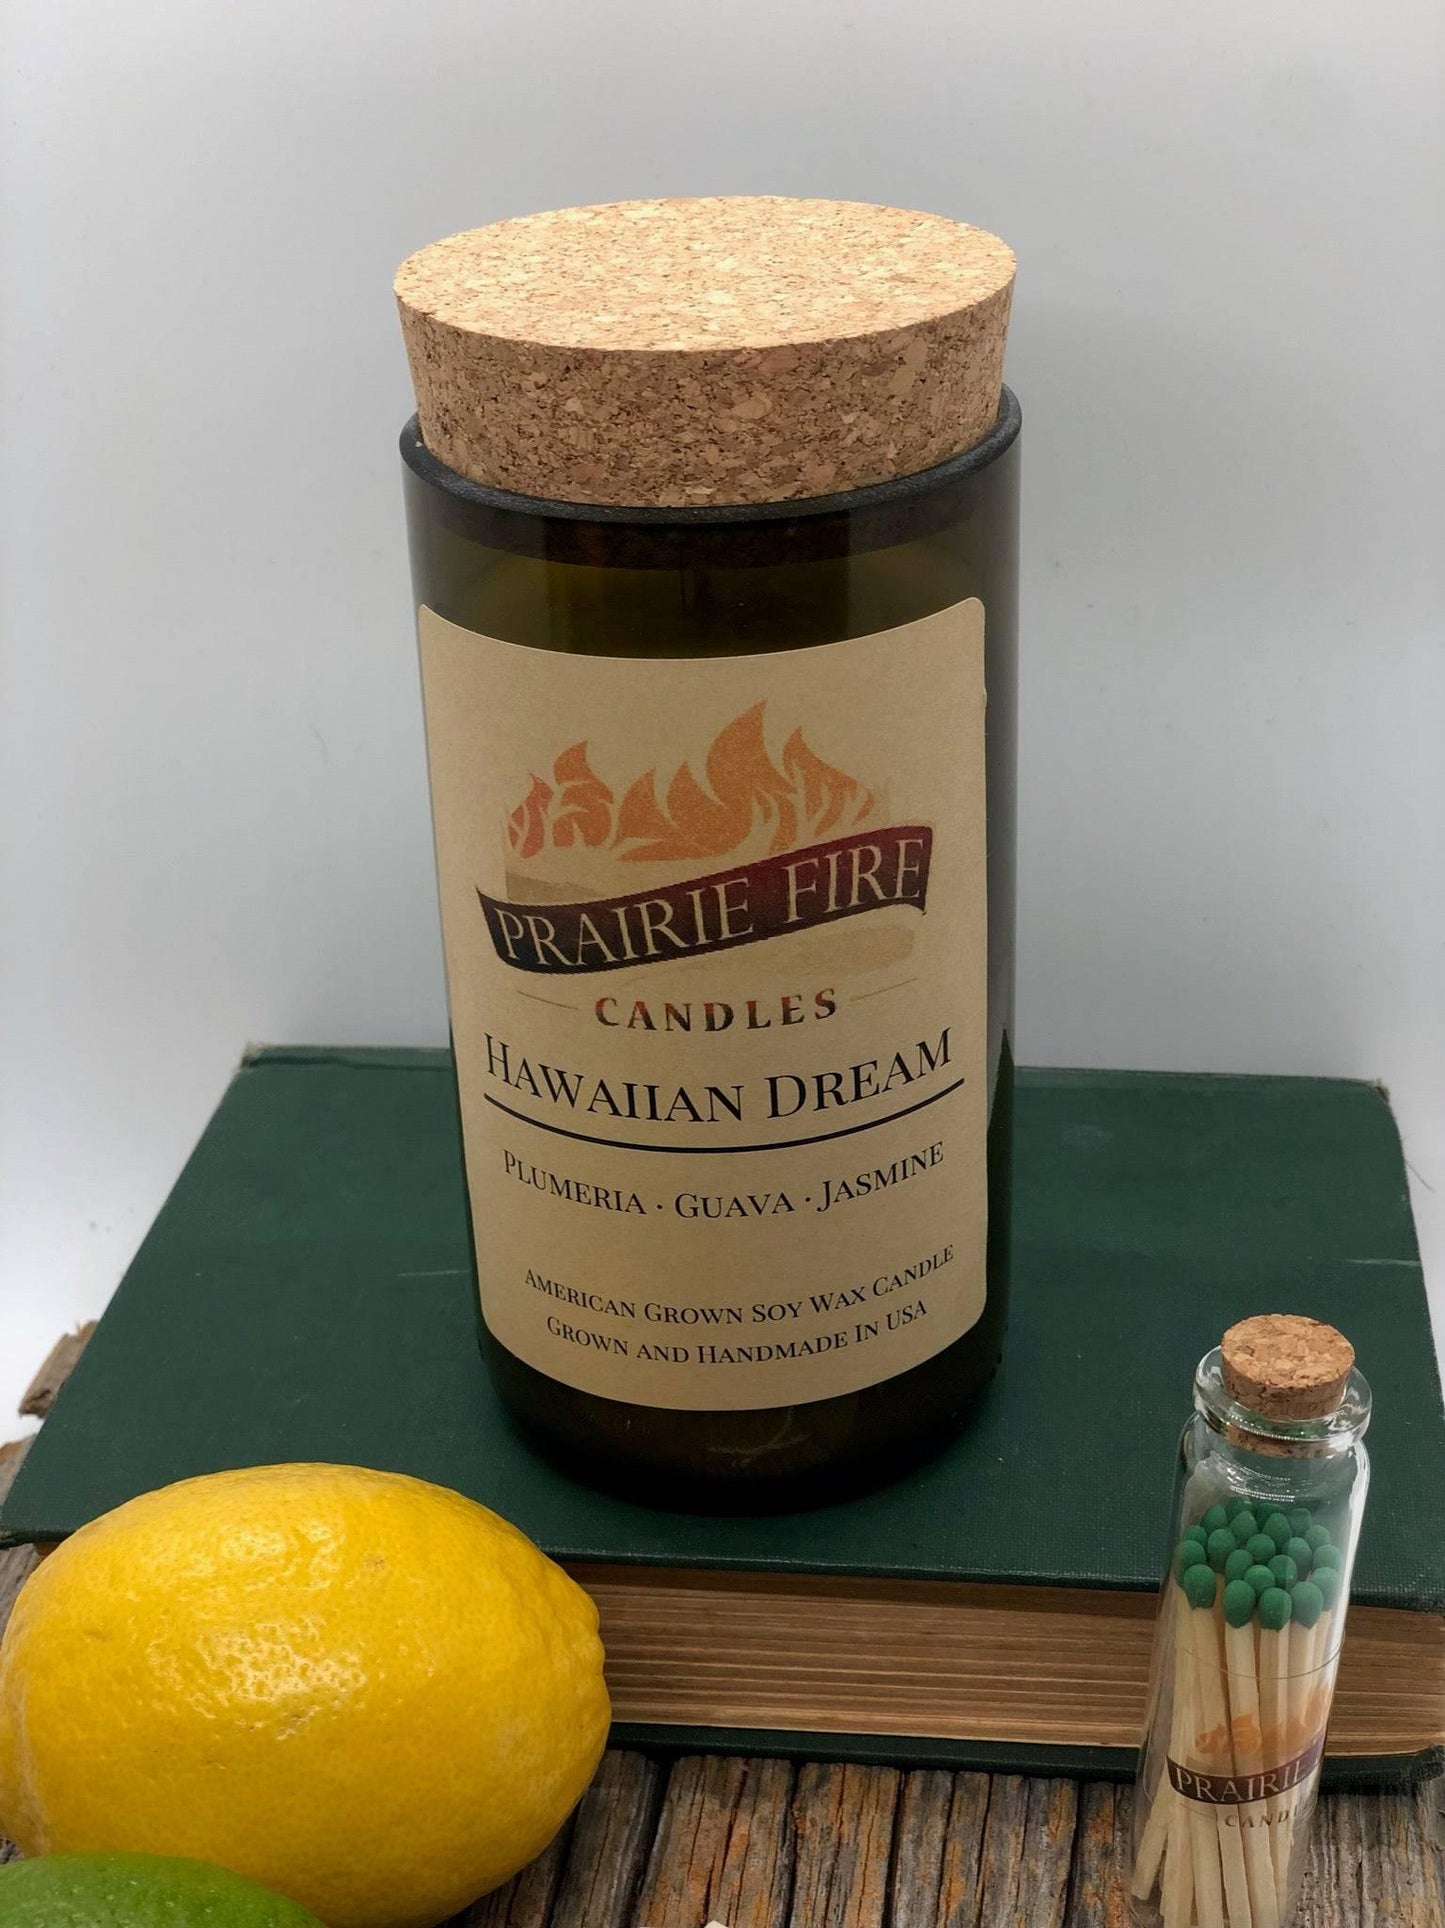 Hawaiian Dream Soy Wax Candle | Repurposed Wine Bottle Candle Natural Cork | Handmade in USA Candle | Eco-Friendly Candle | Non-Toxic Soy Candle - Prairie Fire Candles